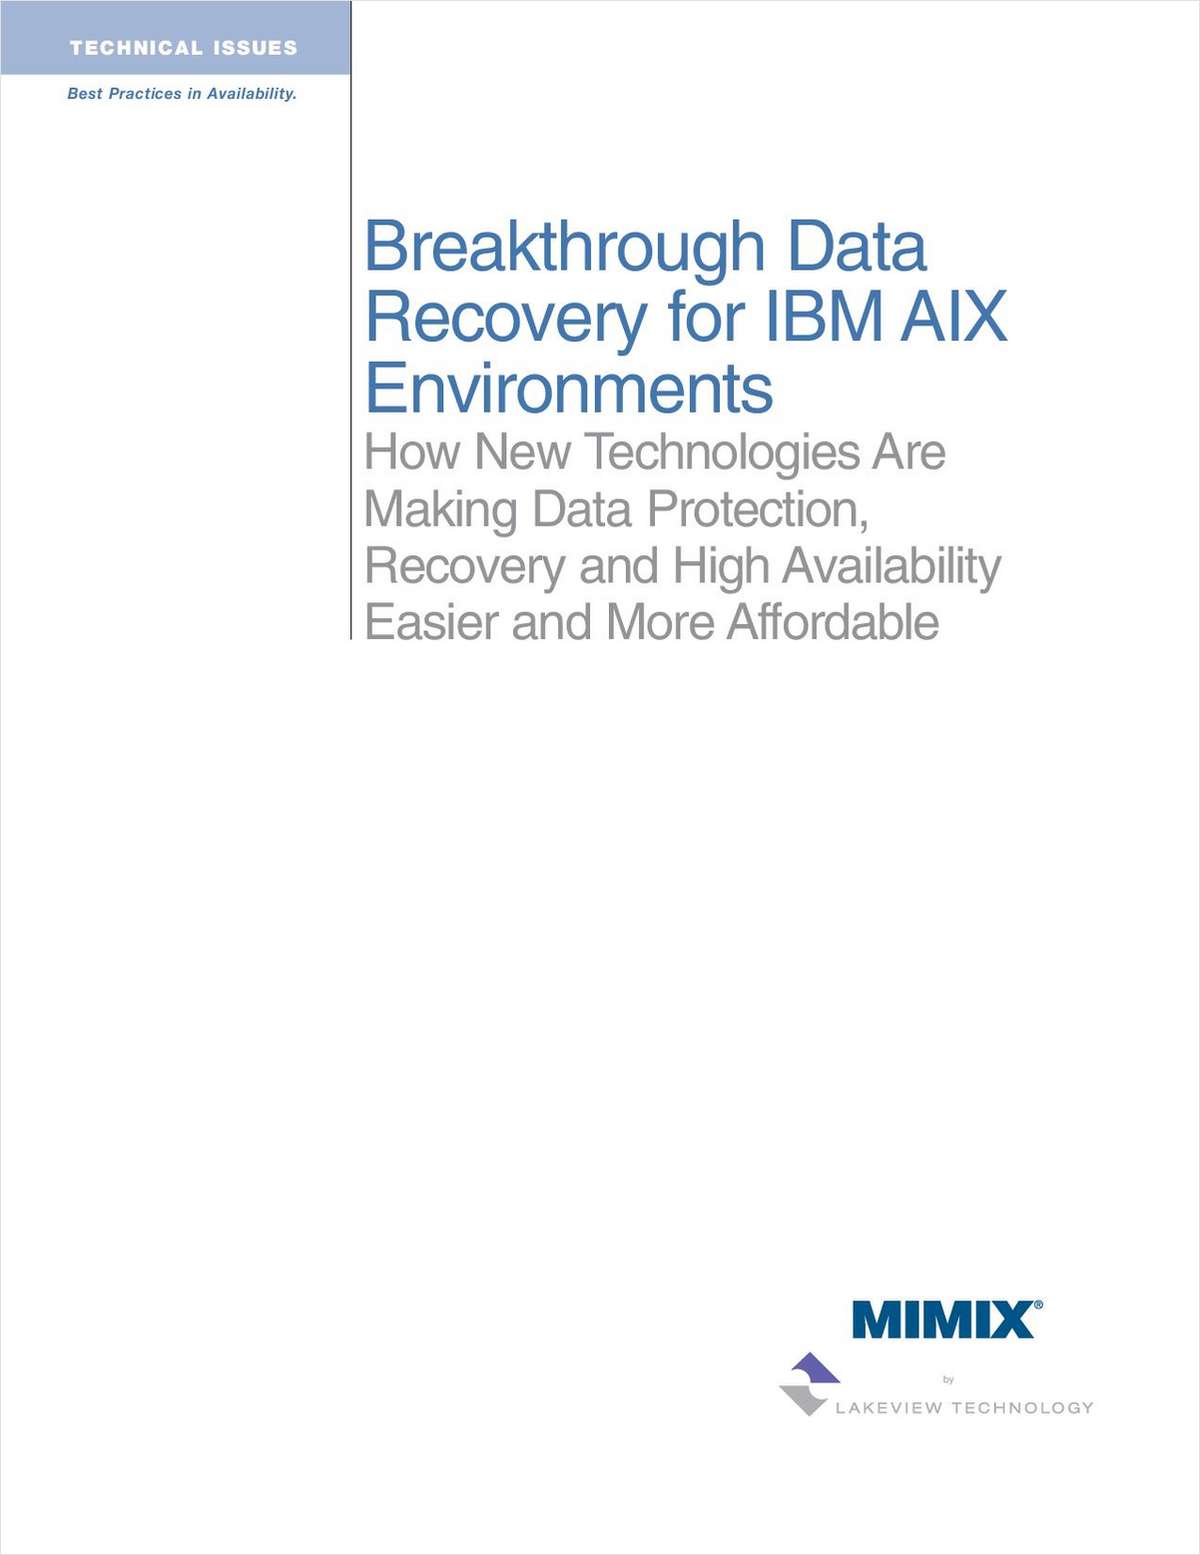 Breakthrough Data Recovery for IBM AIX Environments